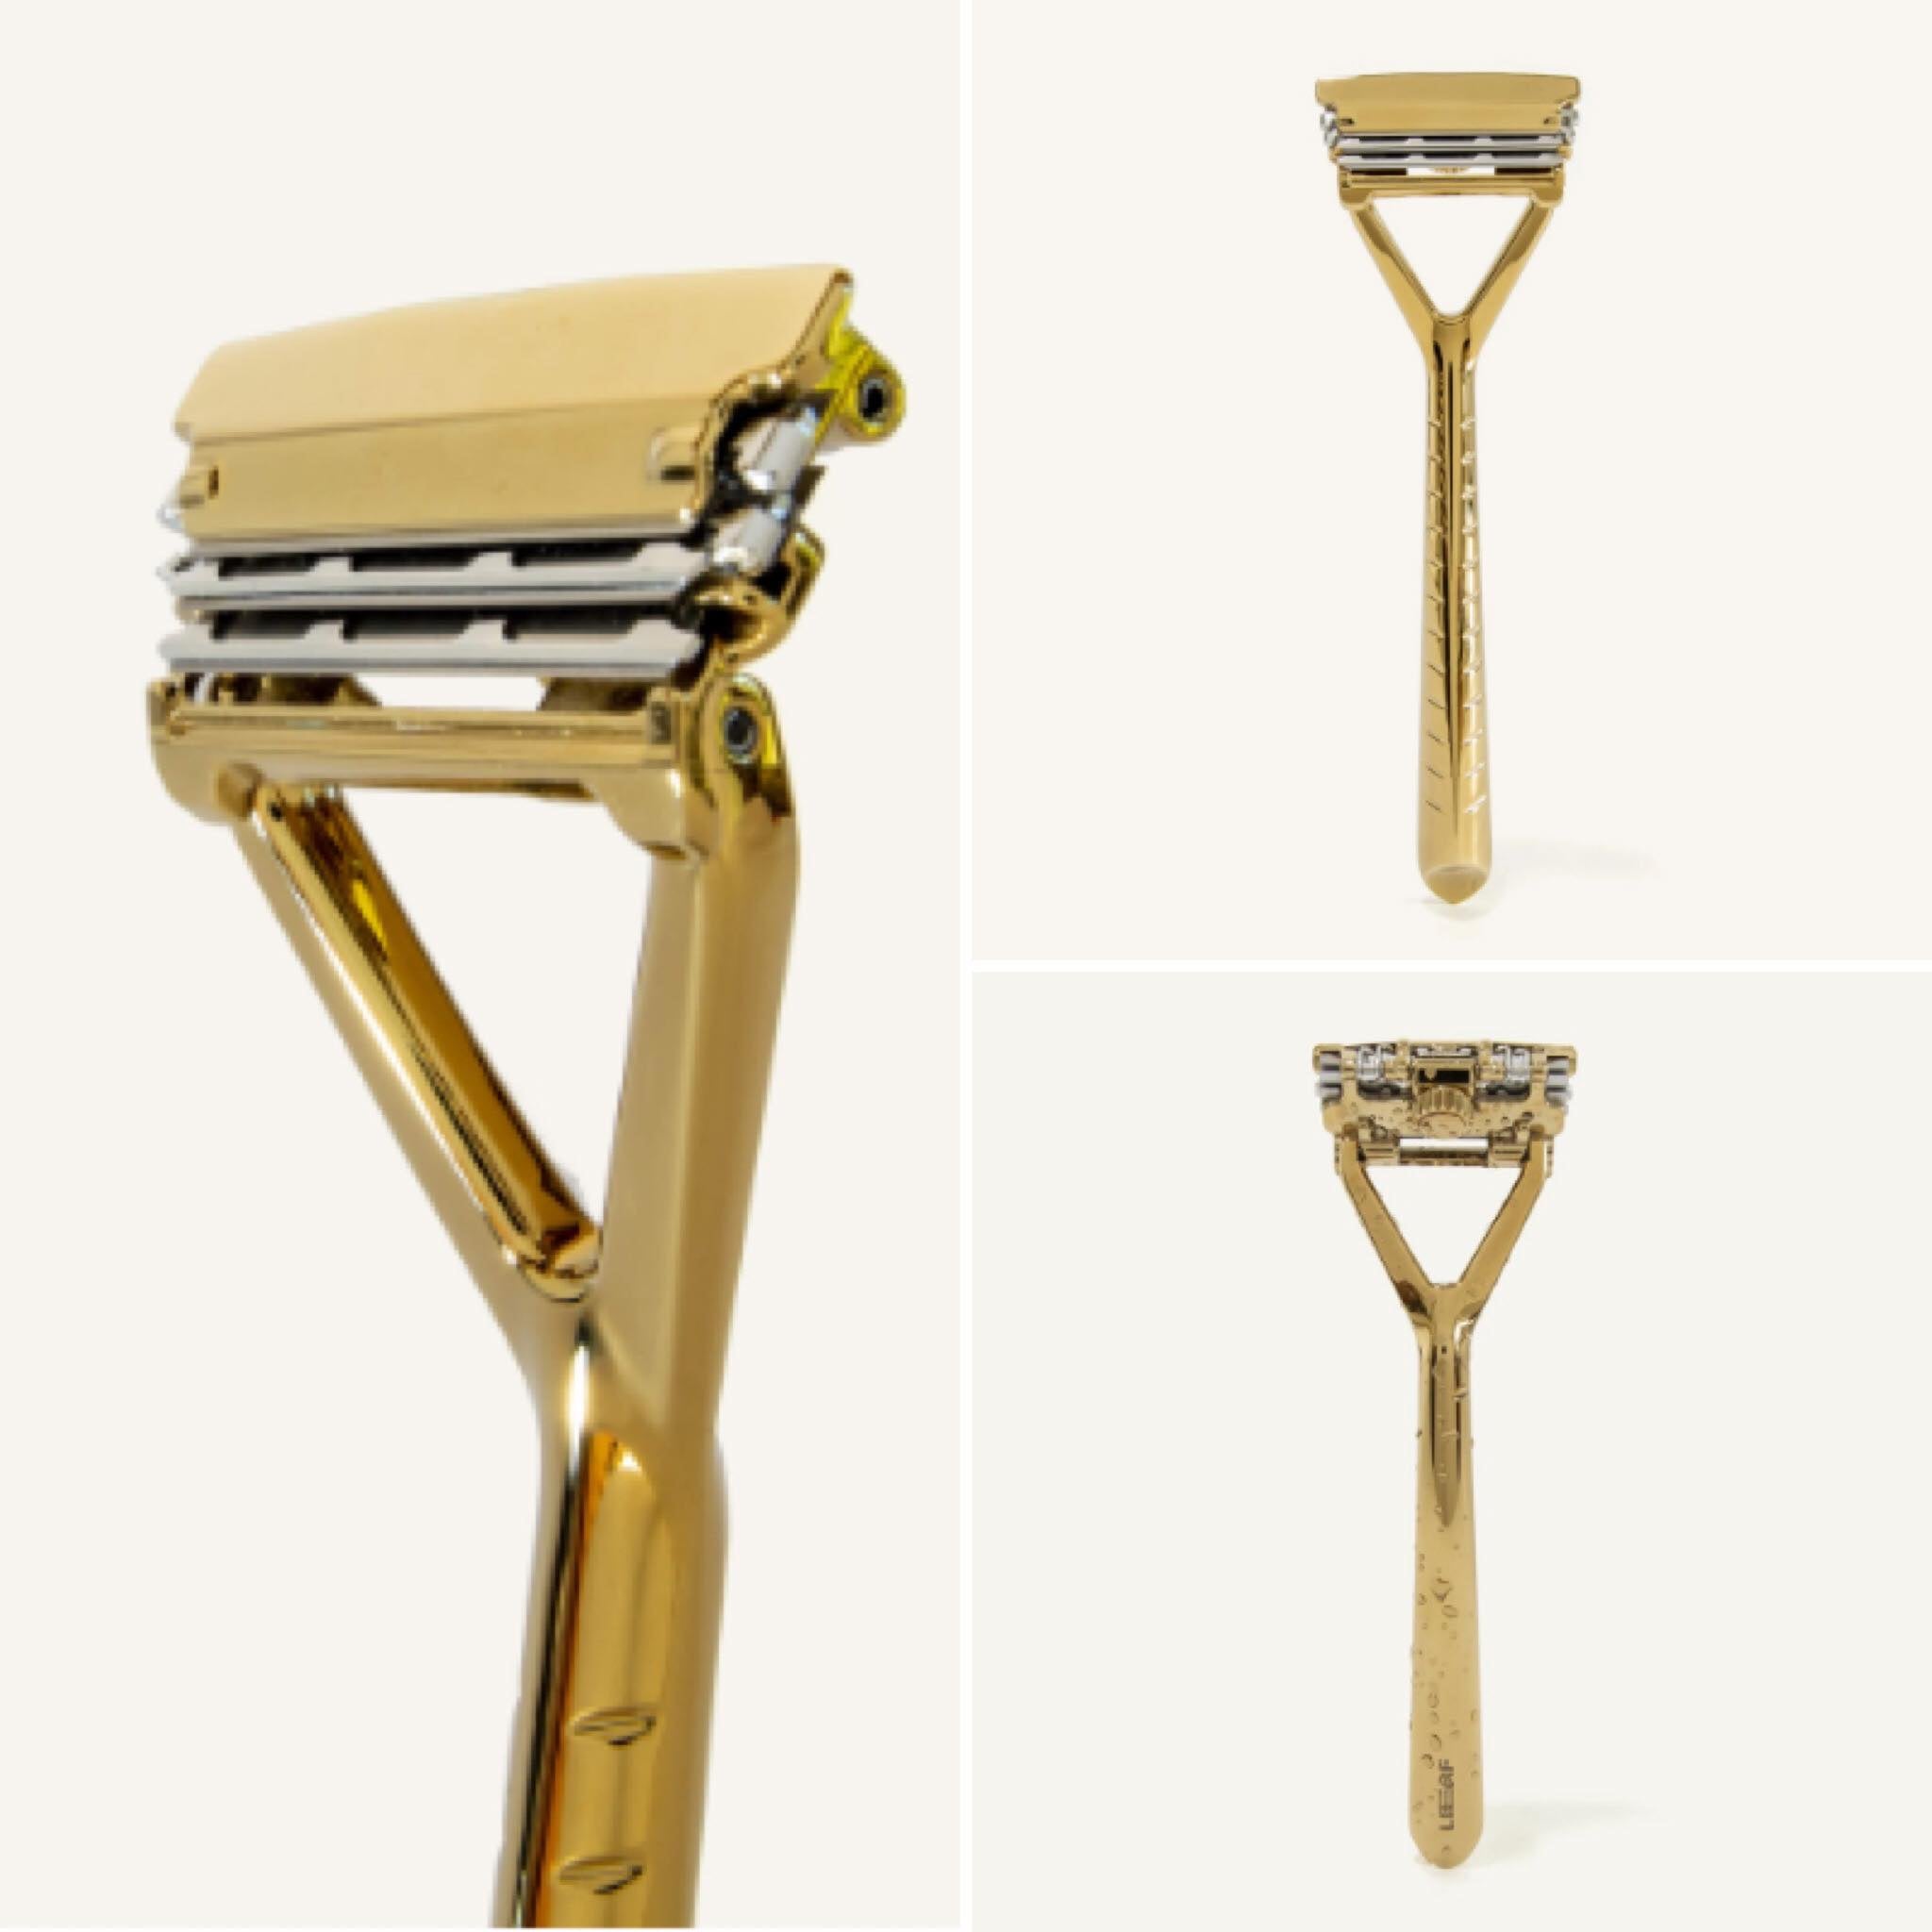 Leaf Razor with gold finish is a modern razor by Leaf Shave with a built-in pivoting heads and up to three blades for a better, more sustainable shave every time